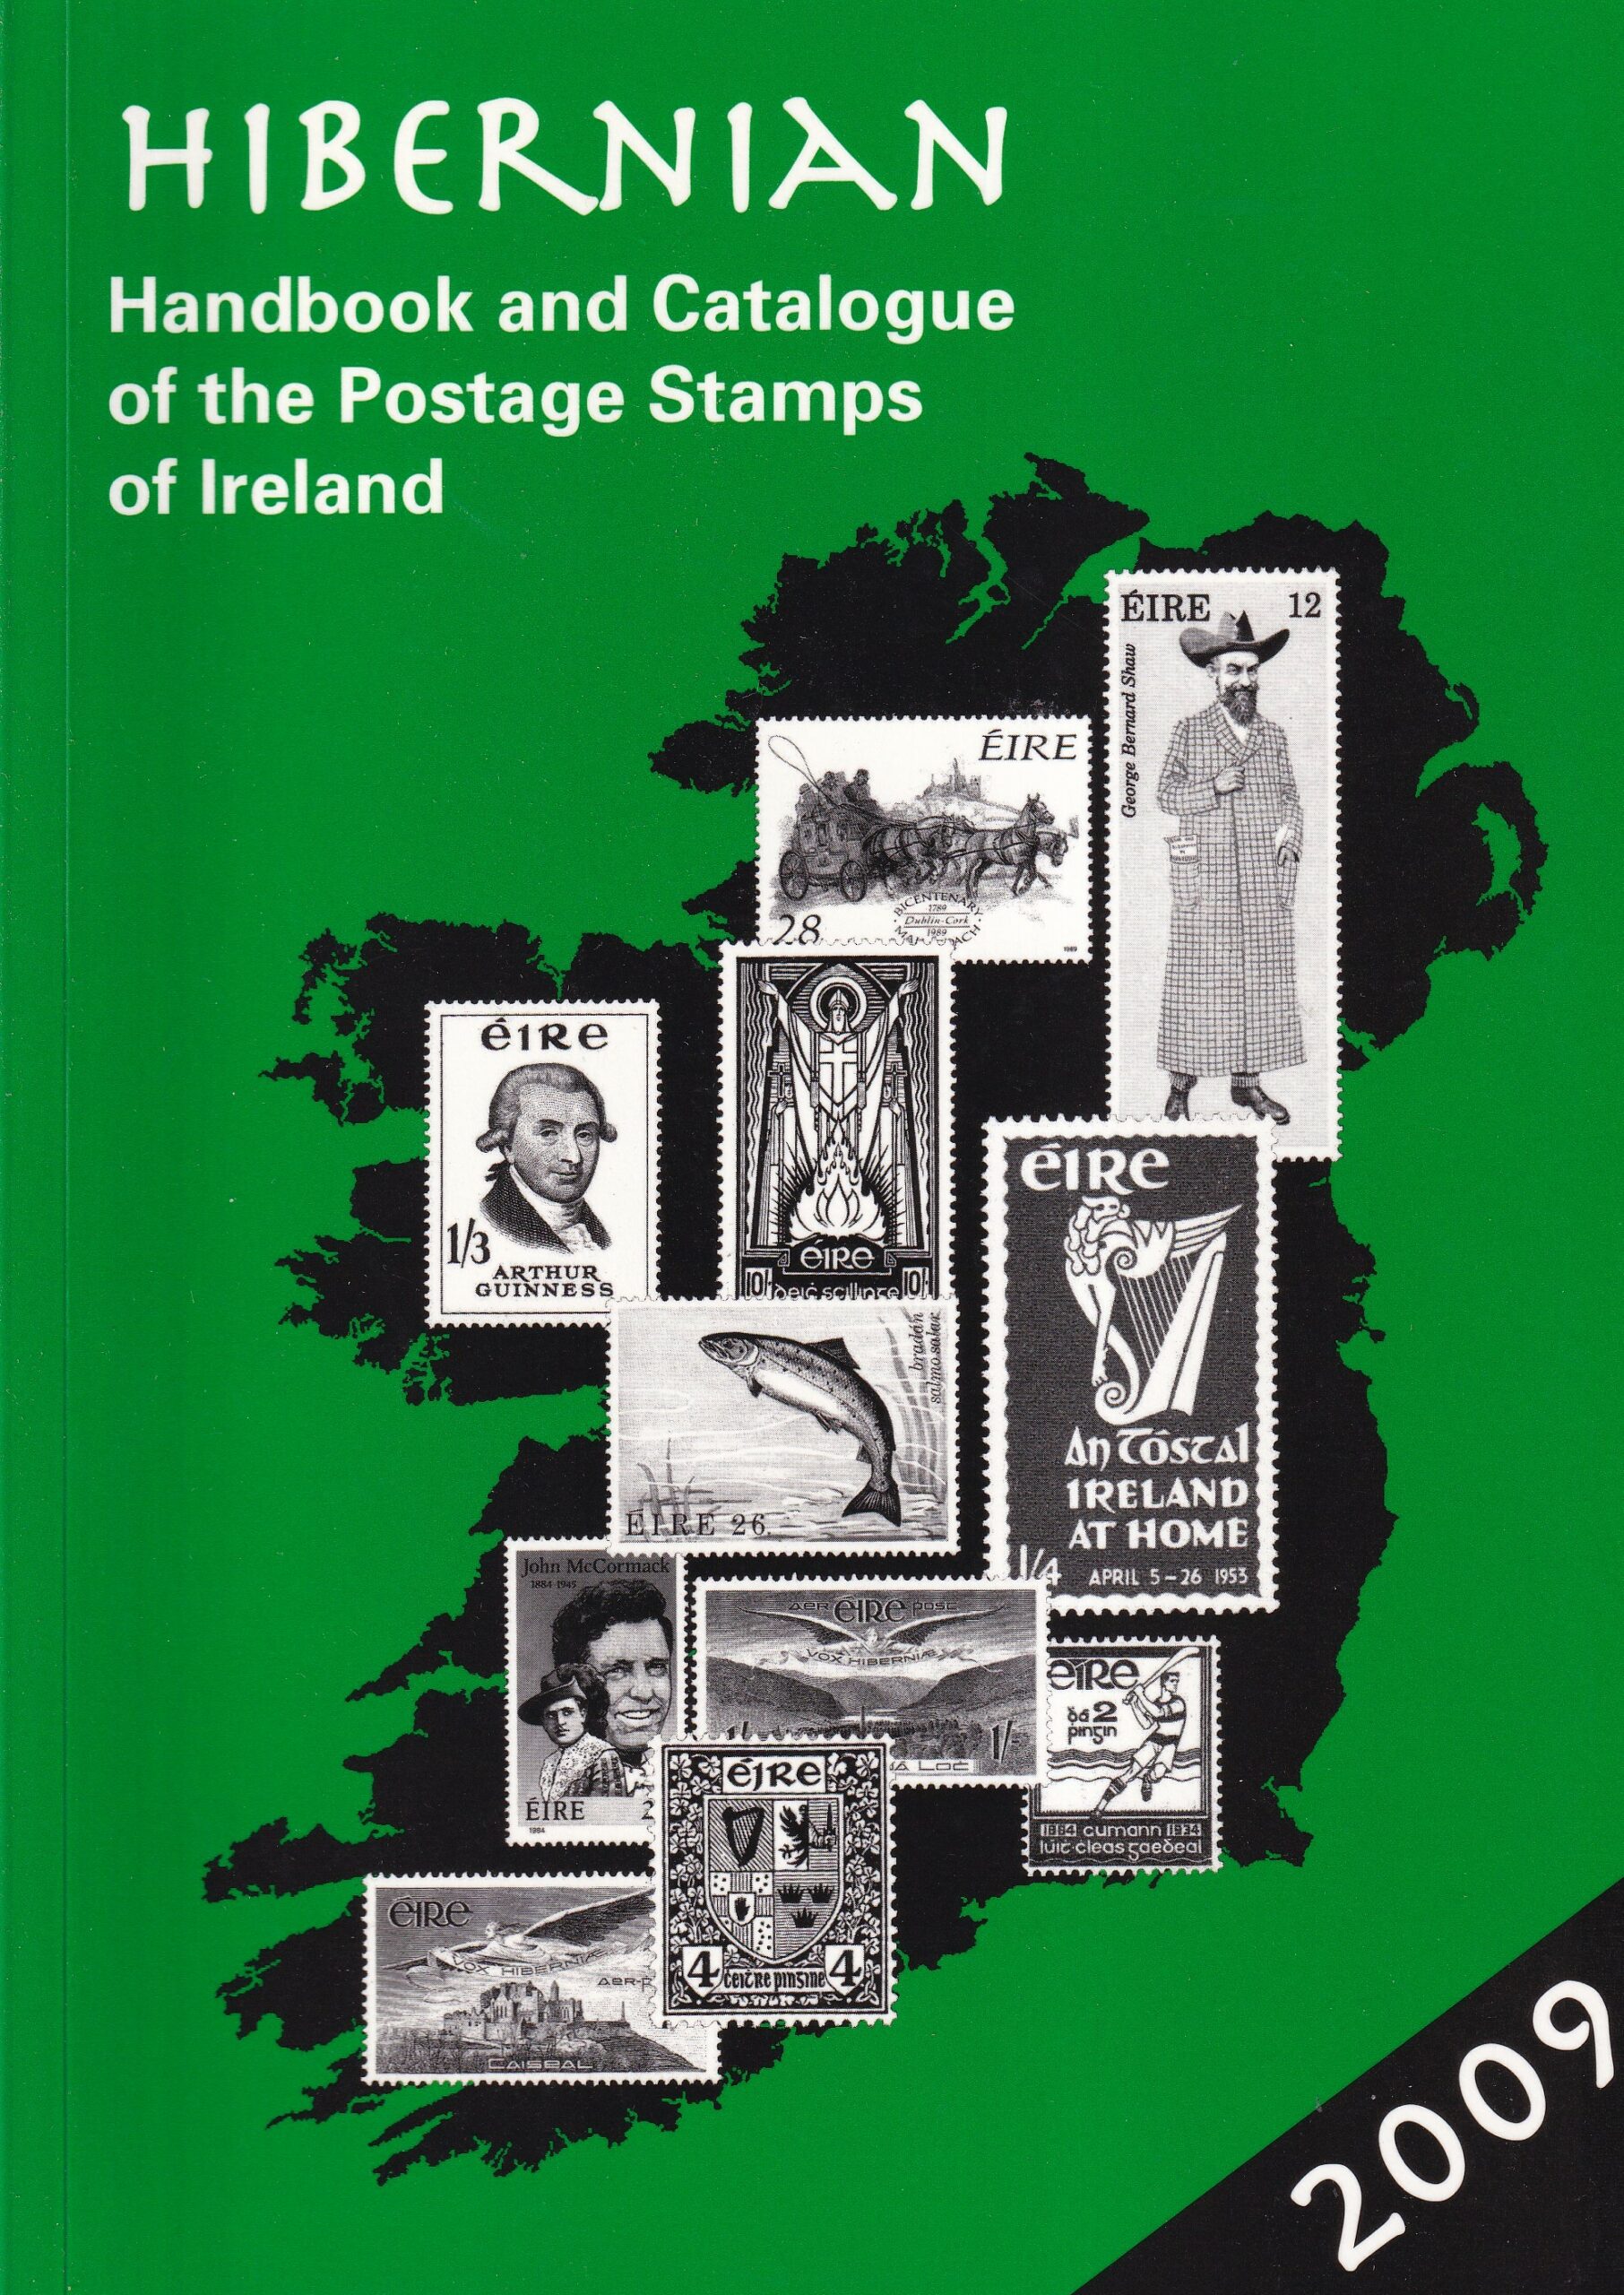 Hibernian: Handbook and Catalogue of the Postage Stamps of Ireland 2009 by Roy Hamilton-Bowen and Lee R. Wolverton (eds.)